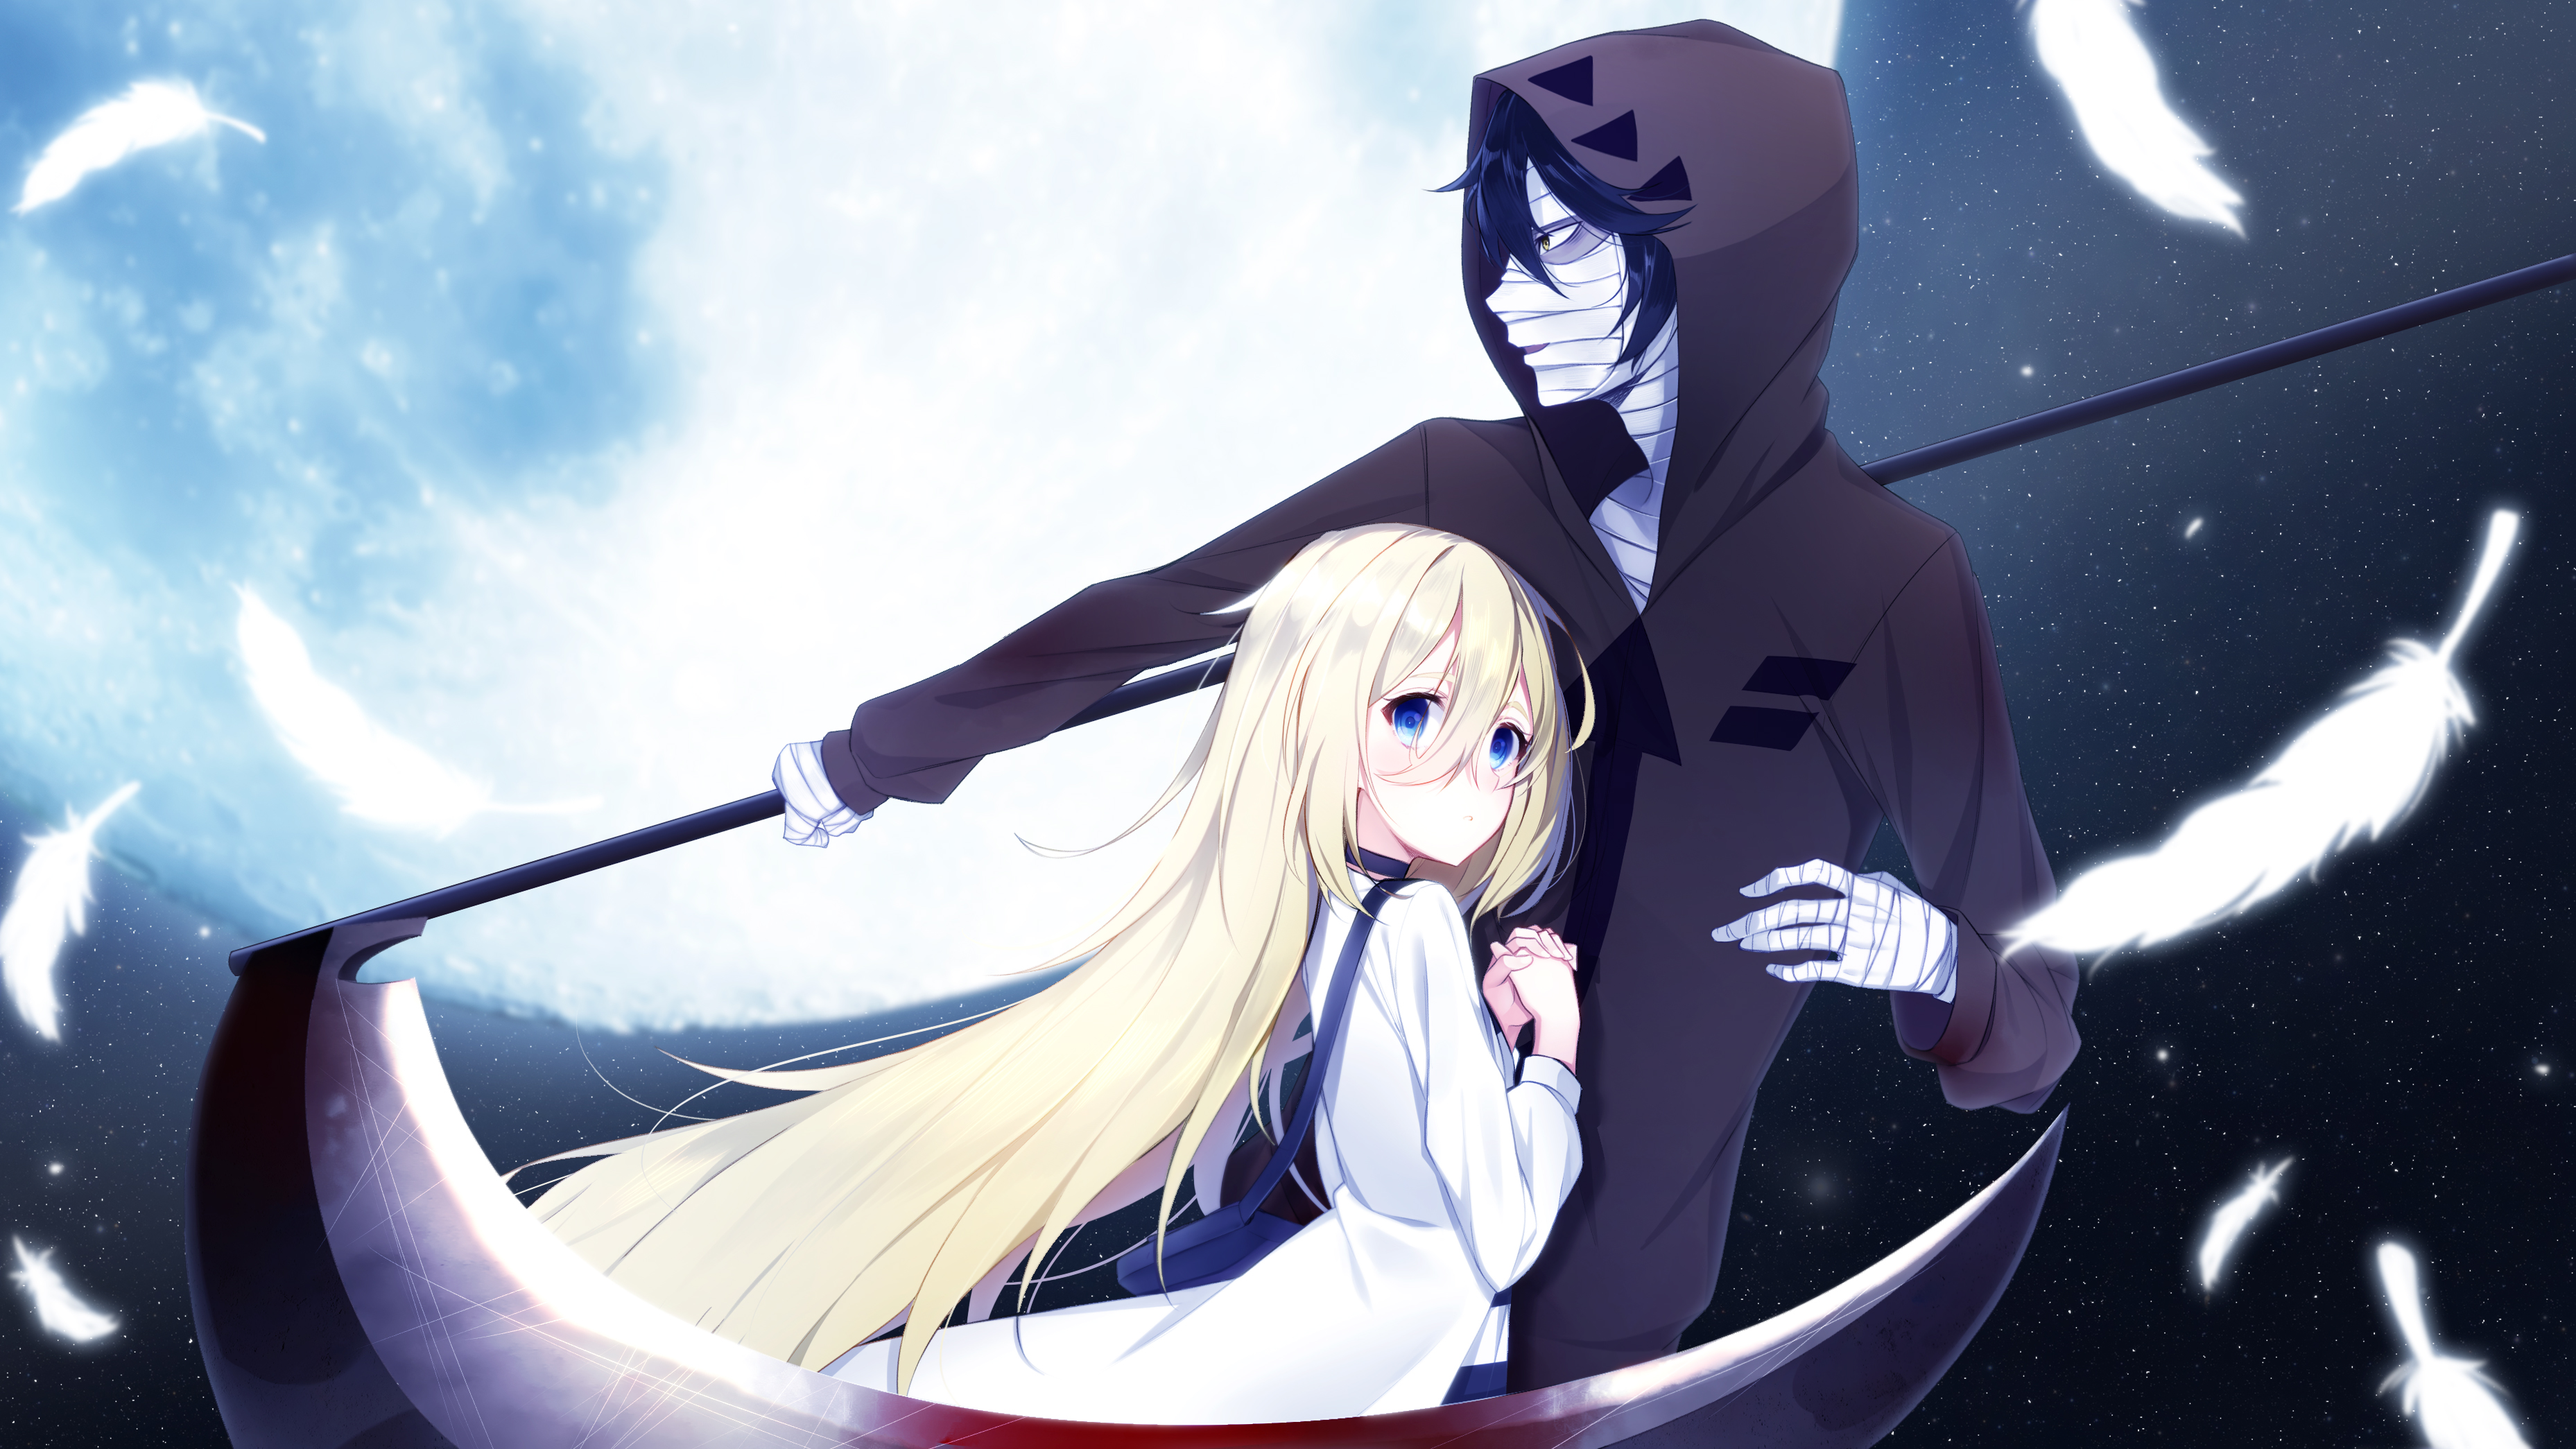 zack, anime and angels of death - image #6188202 on, anime angel of death  zack - thirstymag.com